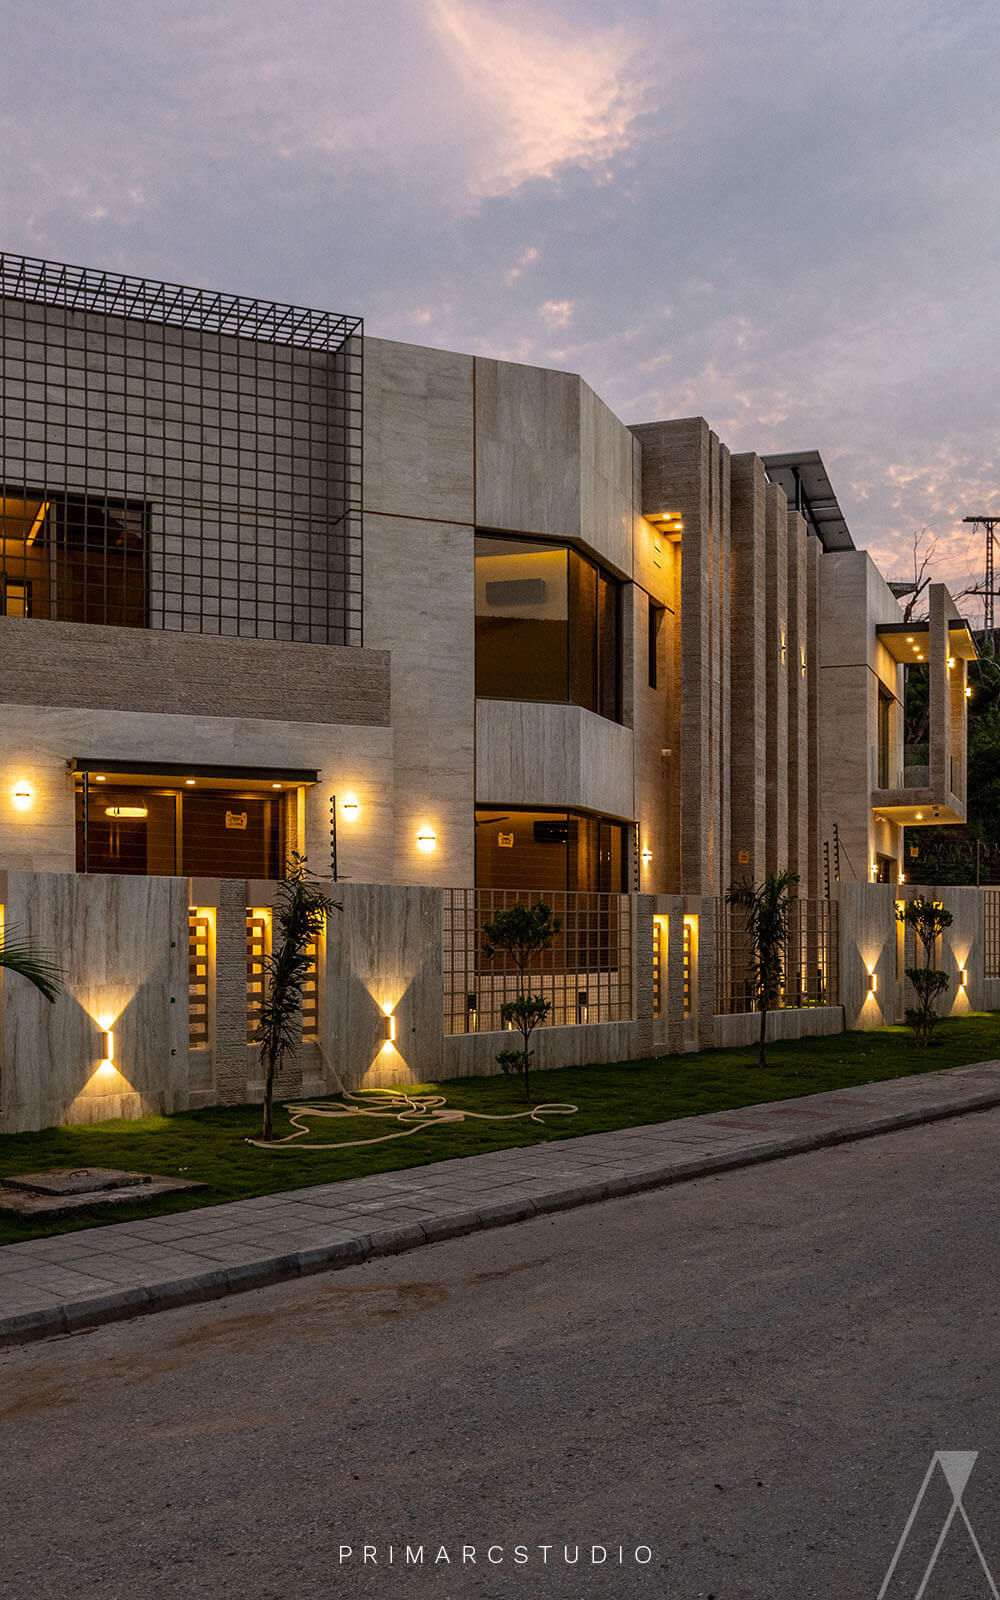 Evening view of boundary wall with exterior design of house